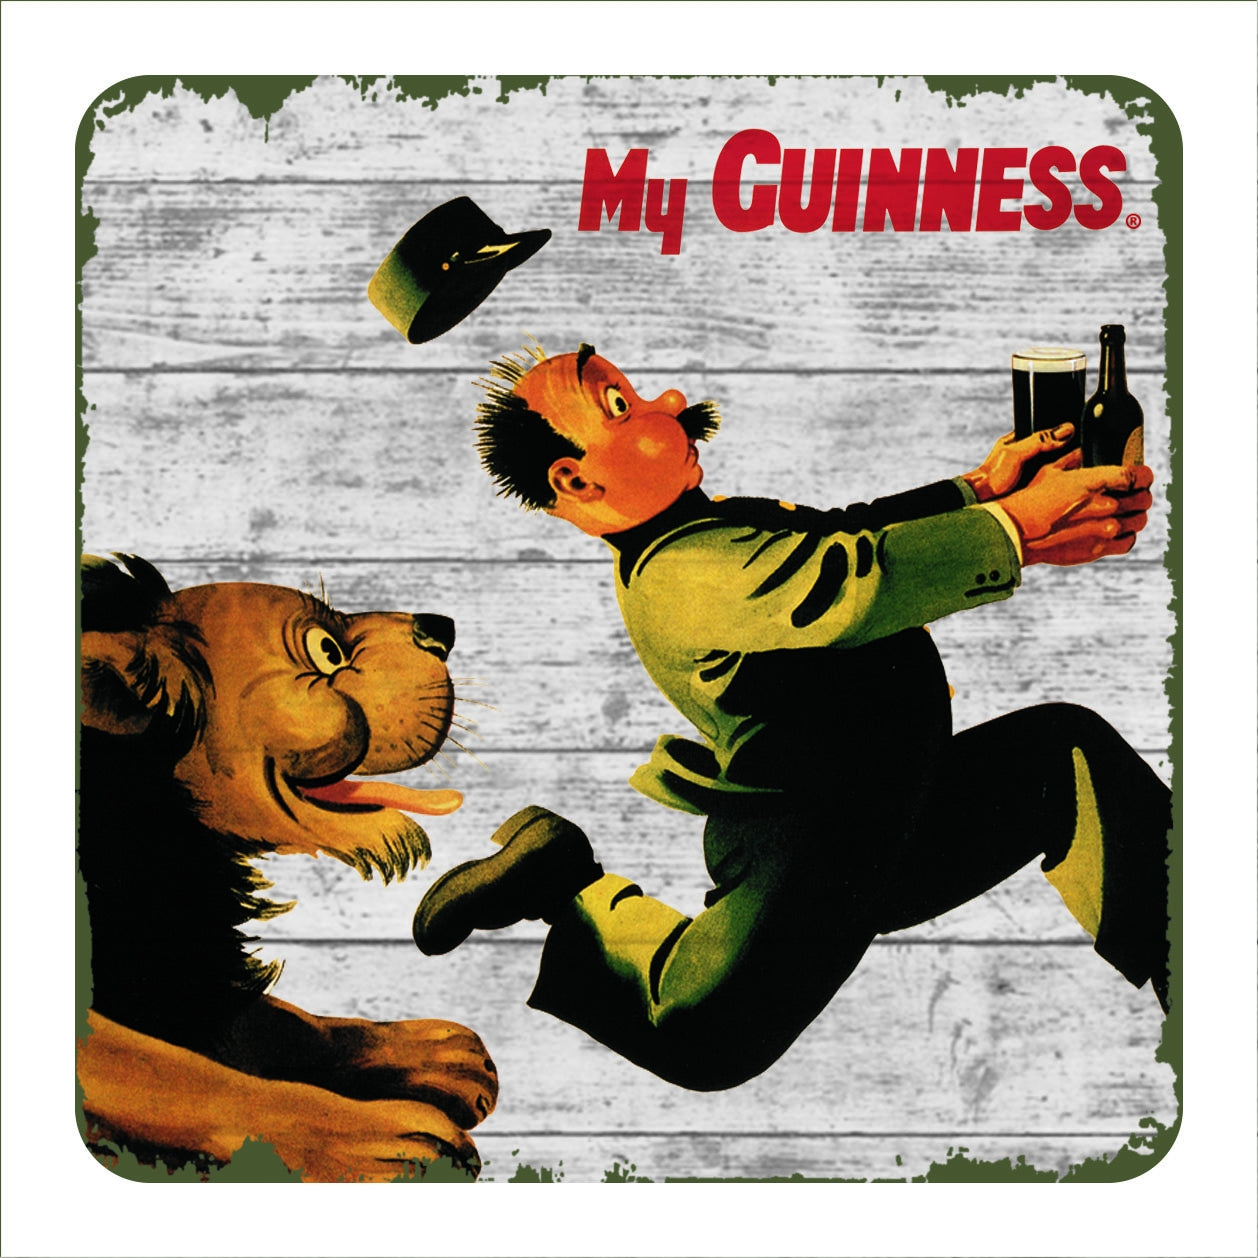 A Guinness Epic Coaster Games featuring a man and a lion, perfect for pub games enthusiasts.